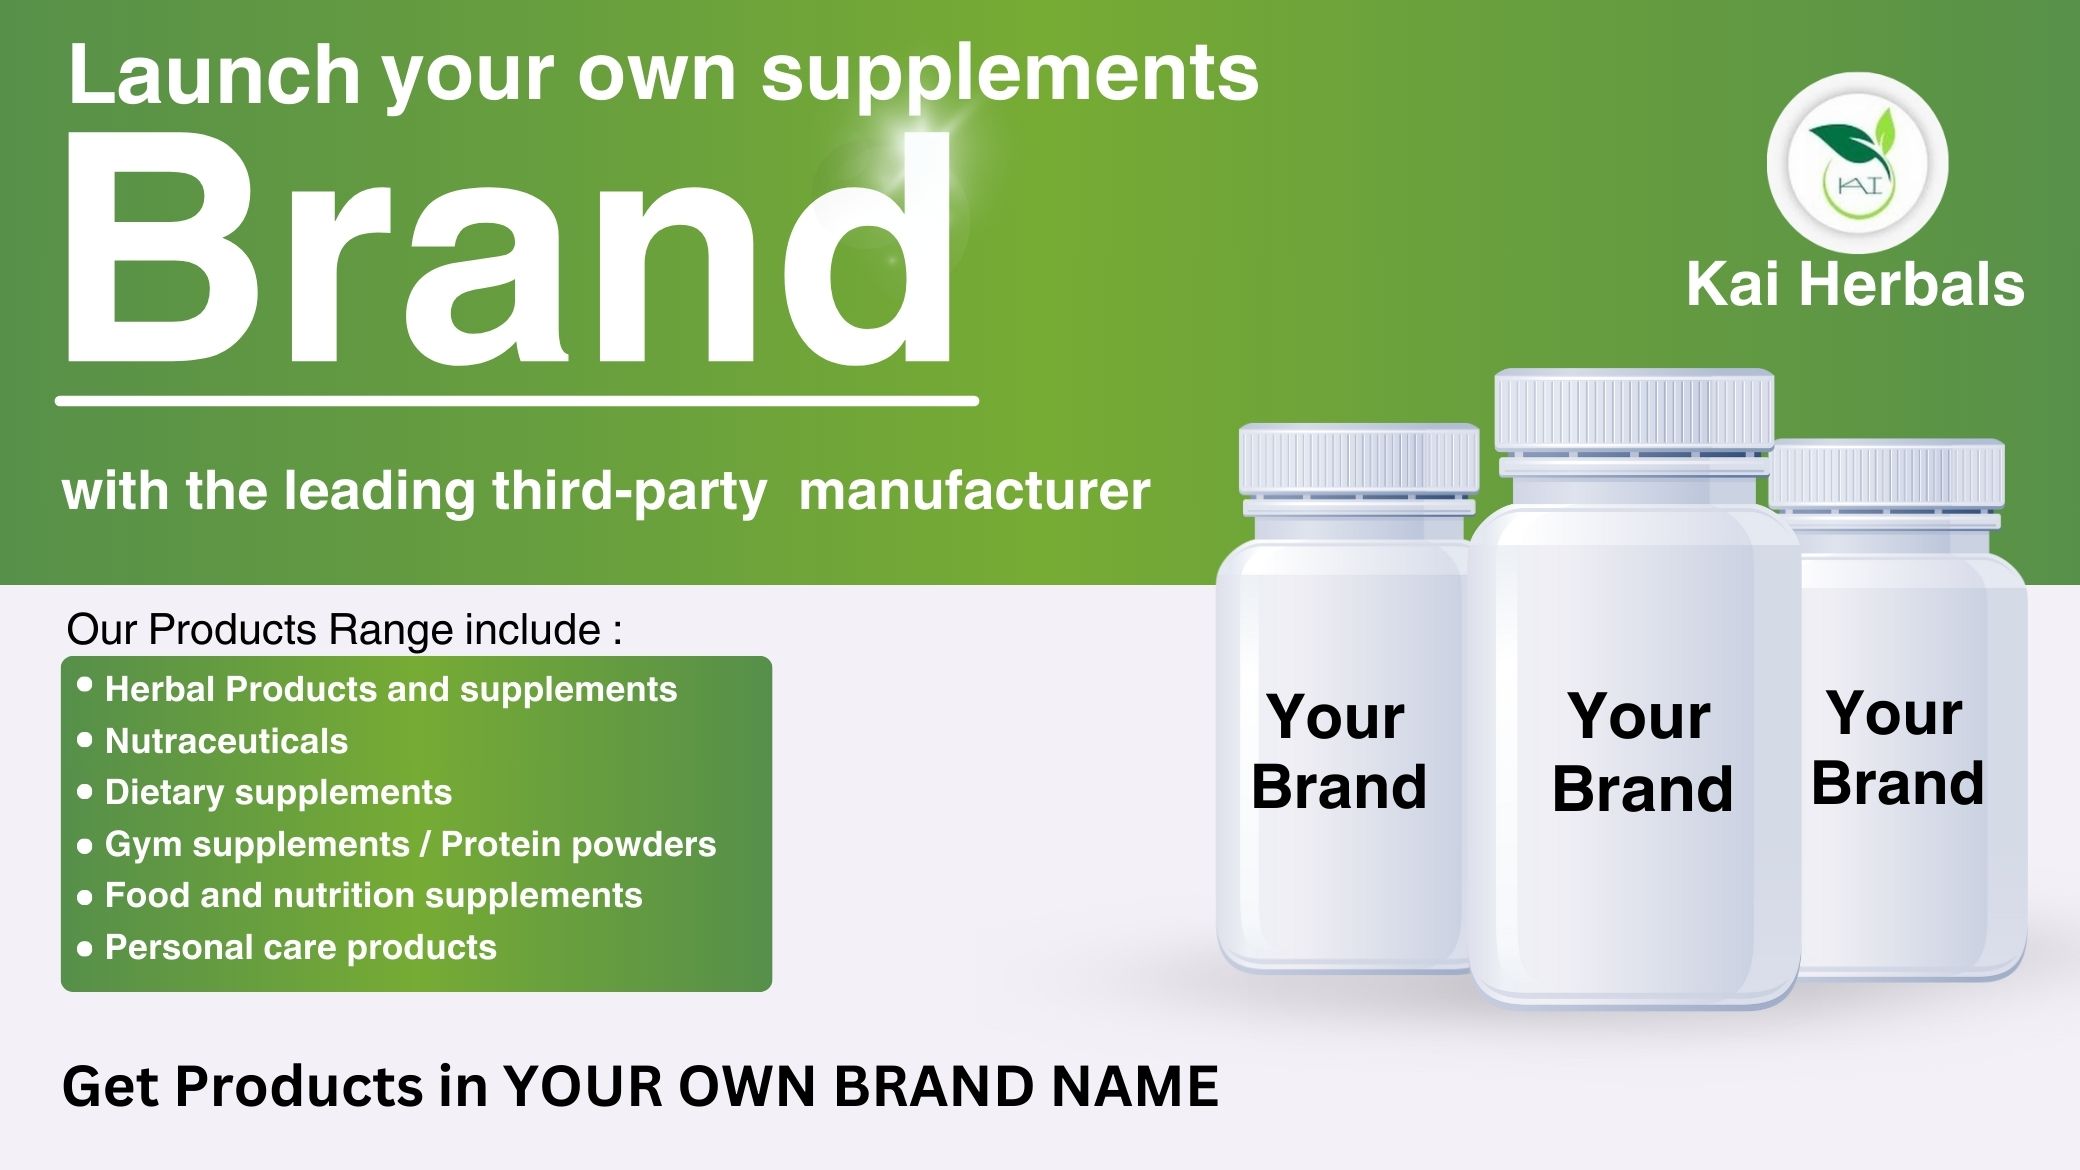 Start your own supplements or herbal products brand with leading third party contract manufacturer Kai Herbals 